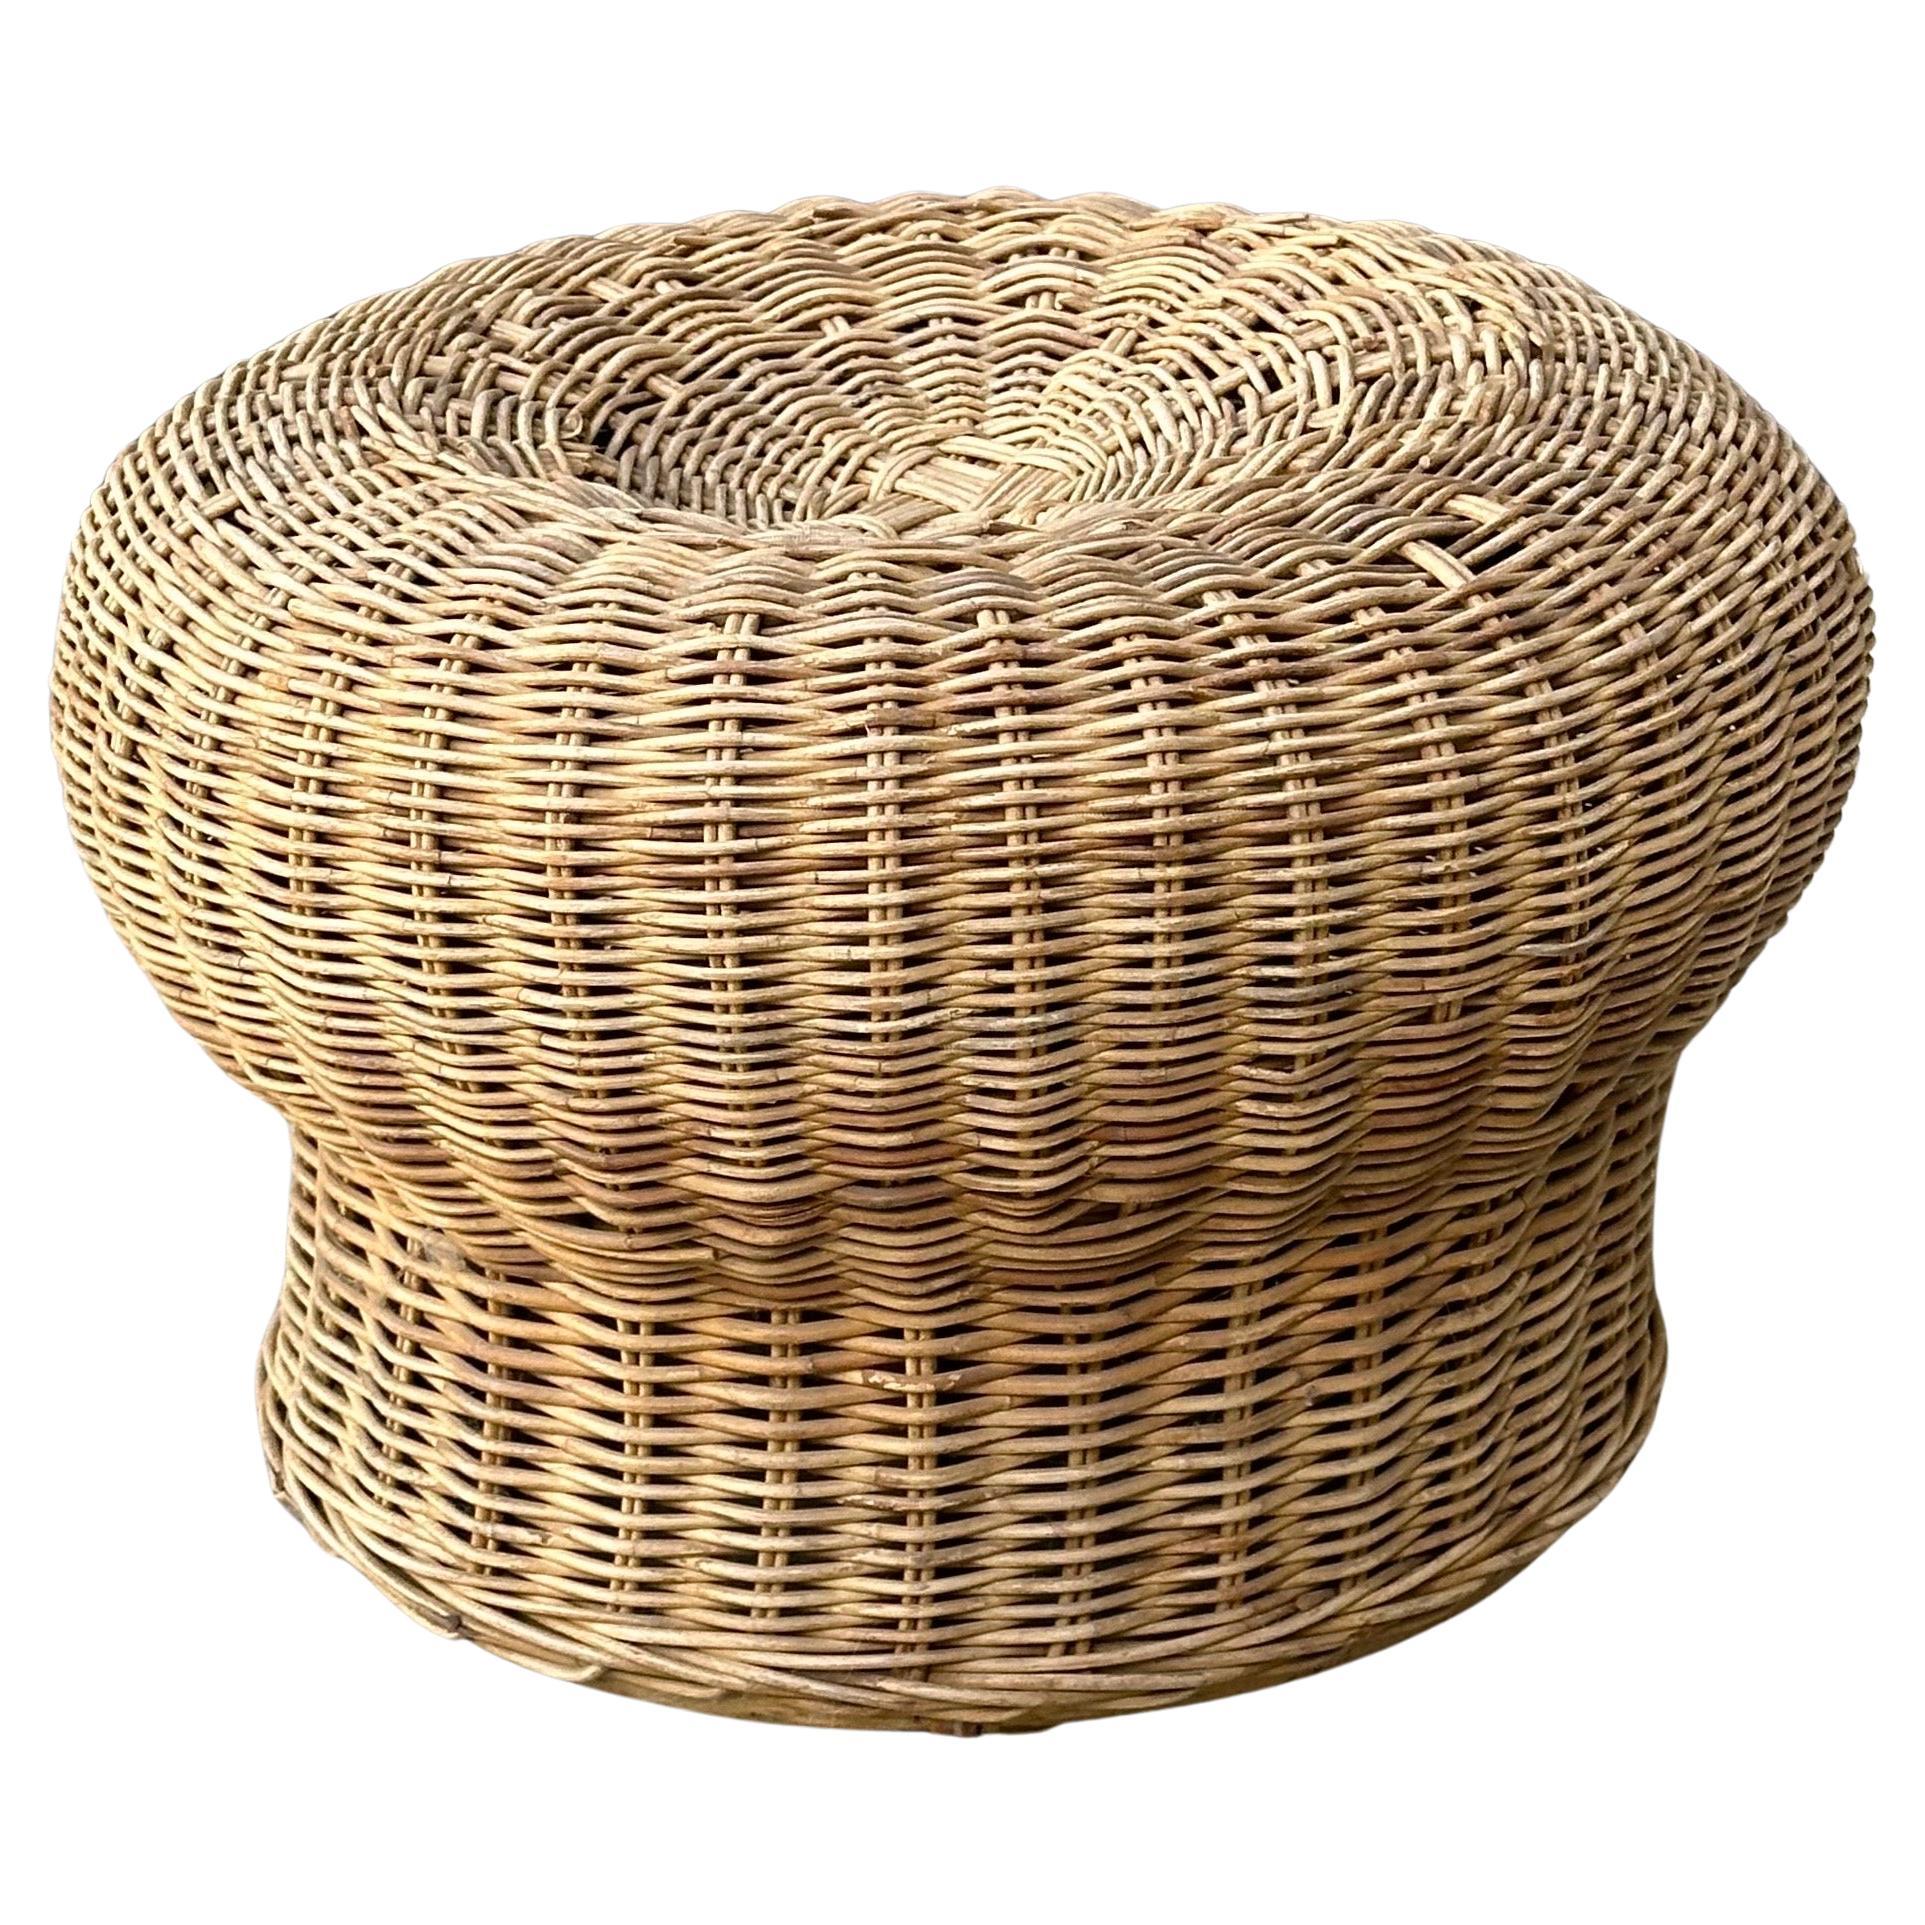 North American Boho Style Sculptural Wicker Chair and Ottoman For Sale